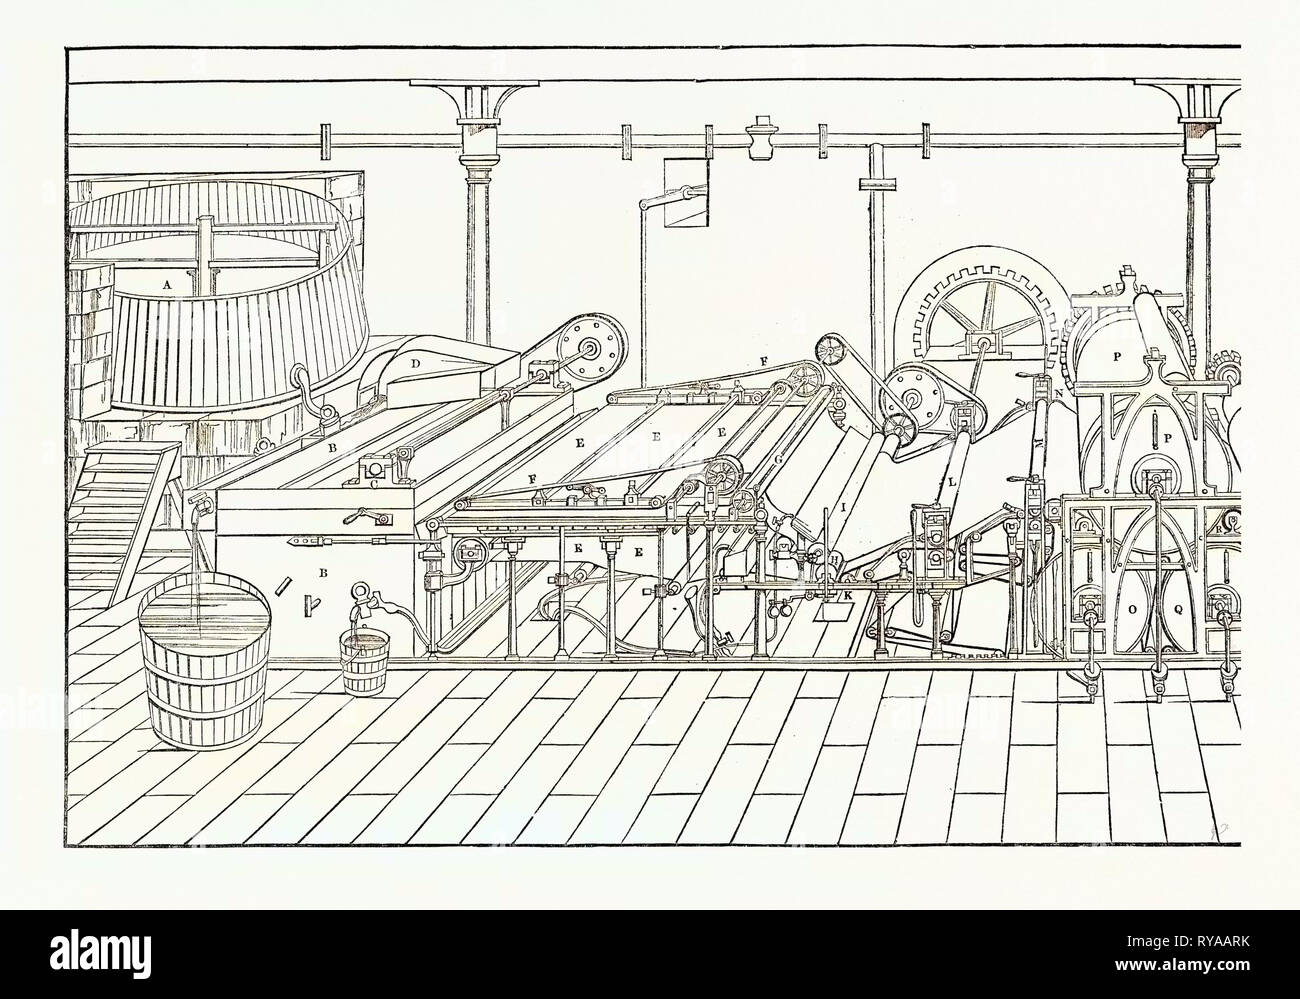 Machine: A. Chest B. Vat 4 Feet by 5 C. Sifter D. Lifter E. Endless Wire 5 Feet Wide F. Deckel Straps G. Dandy a Wire Cylinder H. Lower Roller of Endless Wire I. Roller L. First Pair of Pressing Rollers M. Second Pair of Pressing Rollers N. Roller Receiving the Sheet Previous to Its Coming Upon O O. First Hot Cylinder. P. Second Hot Cylinder Q. Third Hot Cylinder Stock Photo